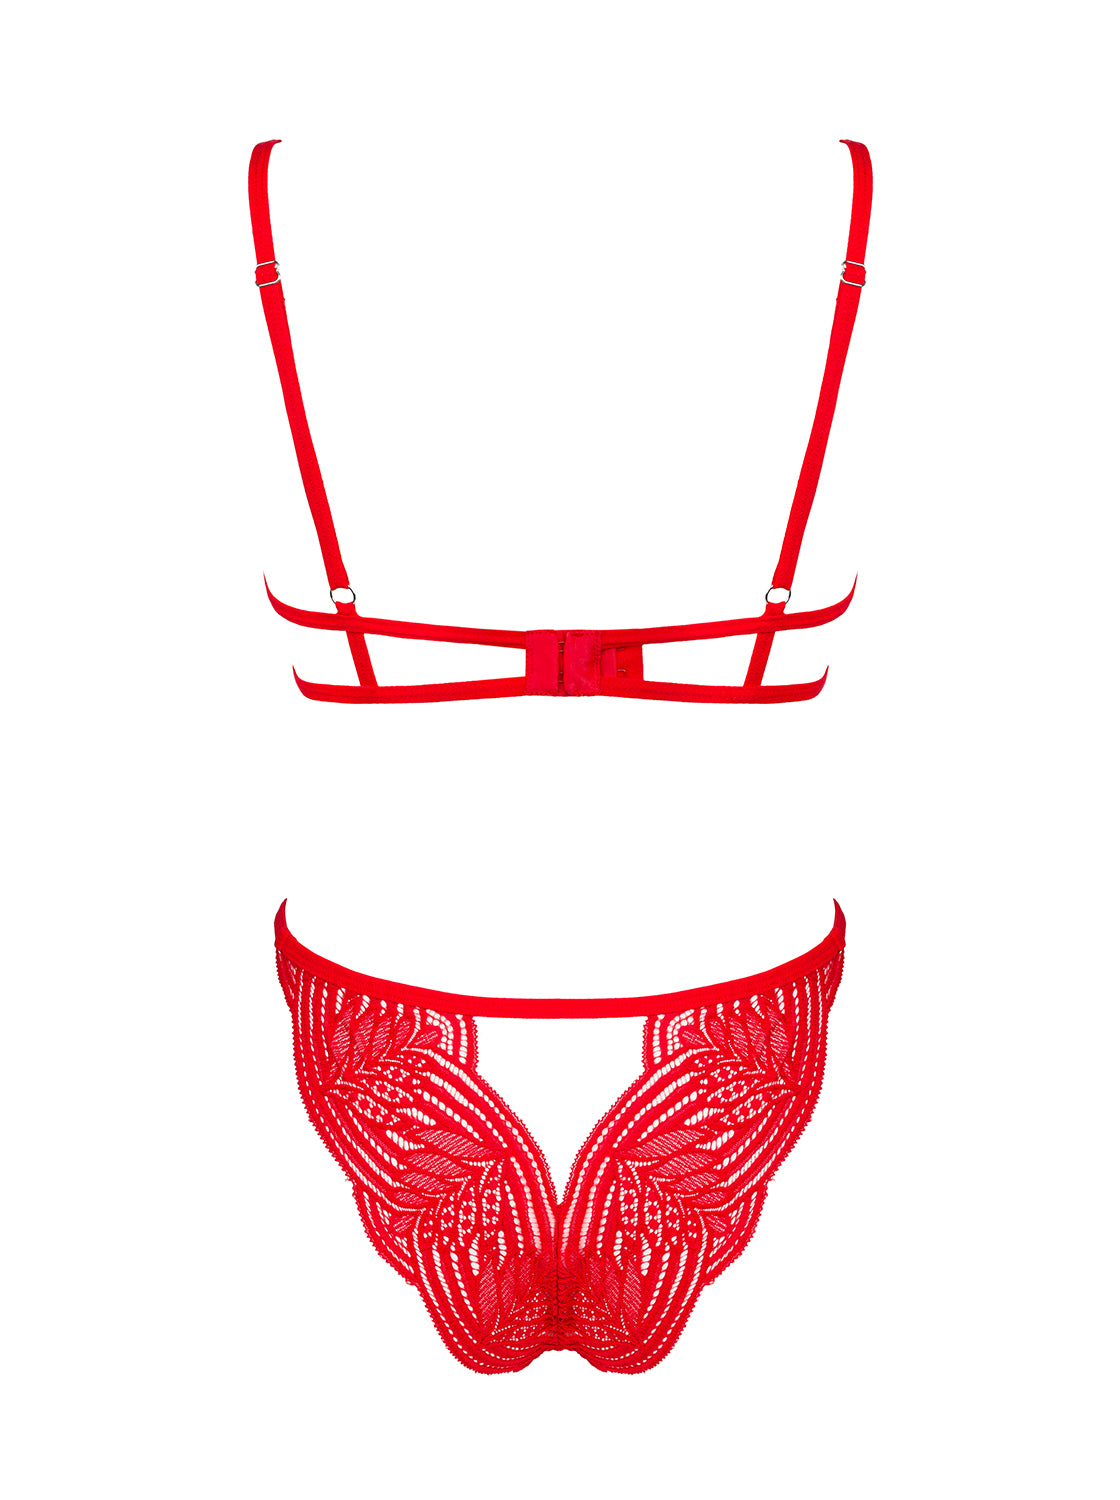 Mellania a red set of bra with sexy cutouts on the underwire cups and panties with an open crotch and a flirtatious cutout above the bottom